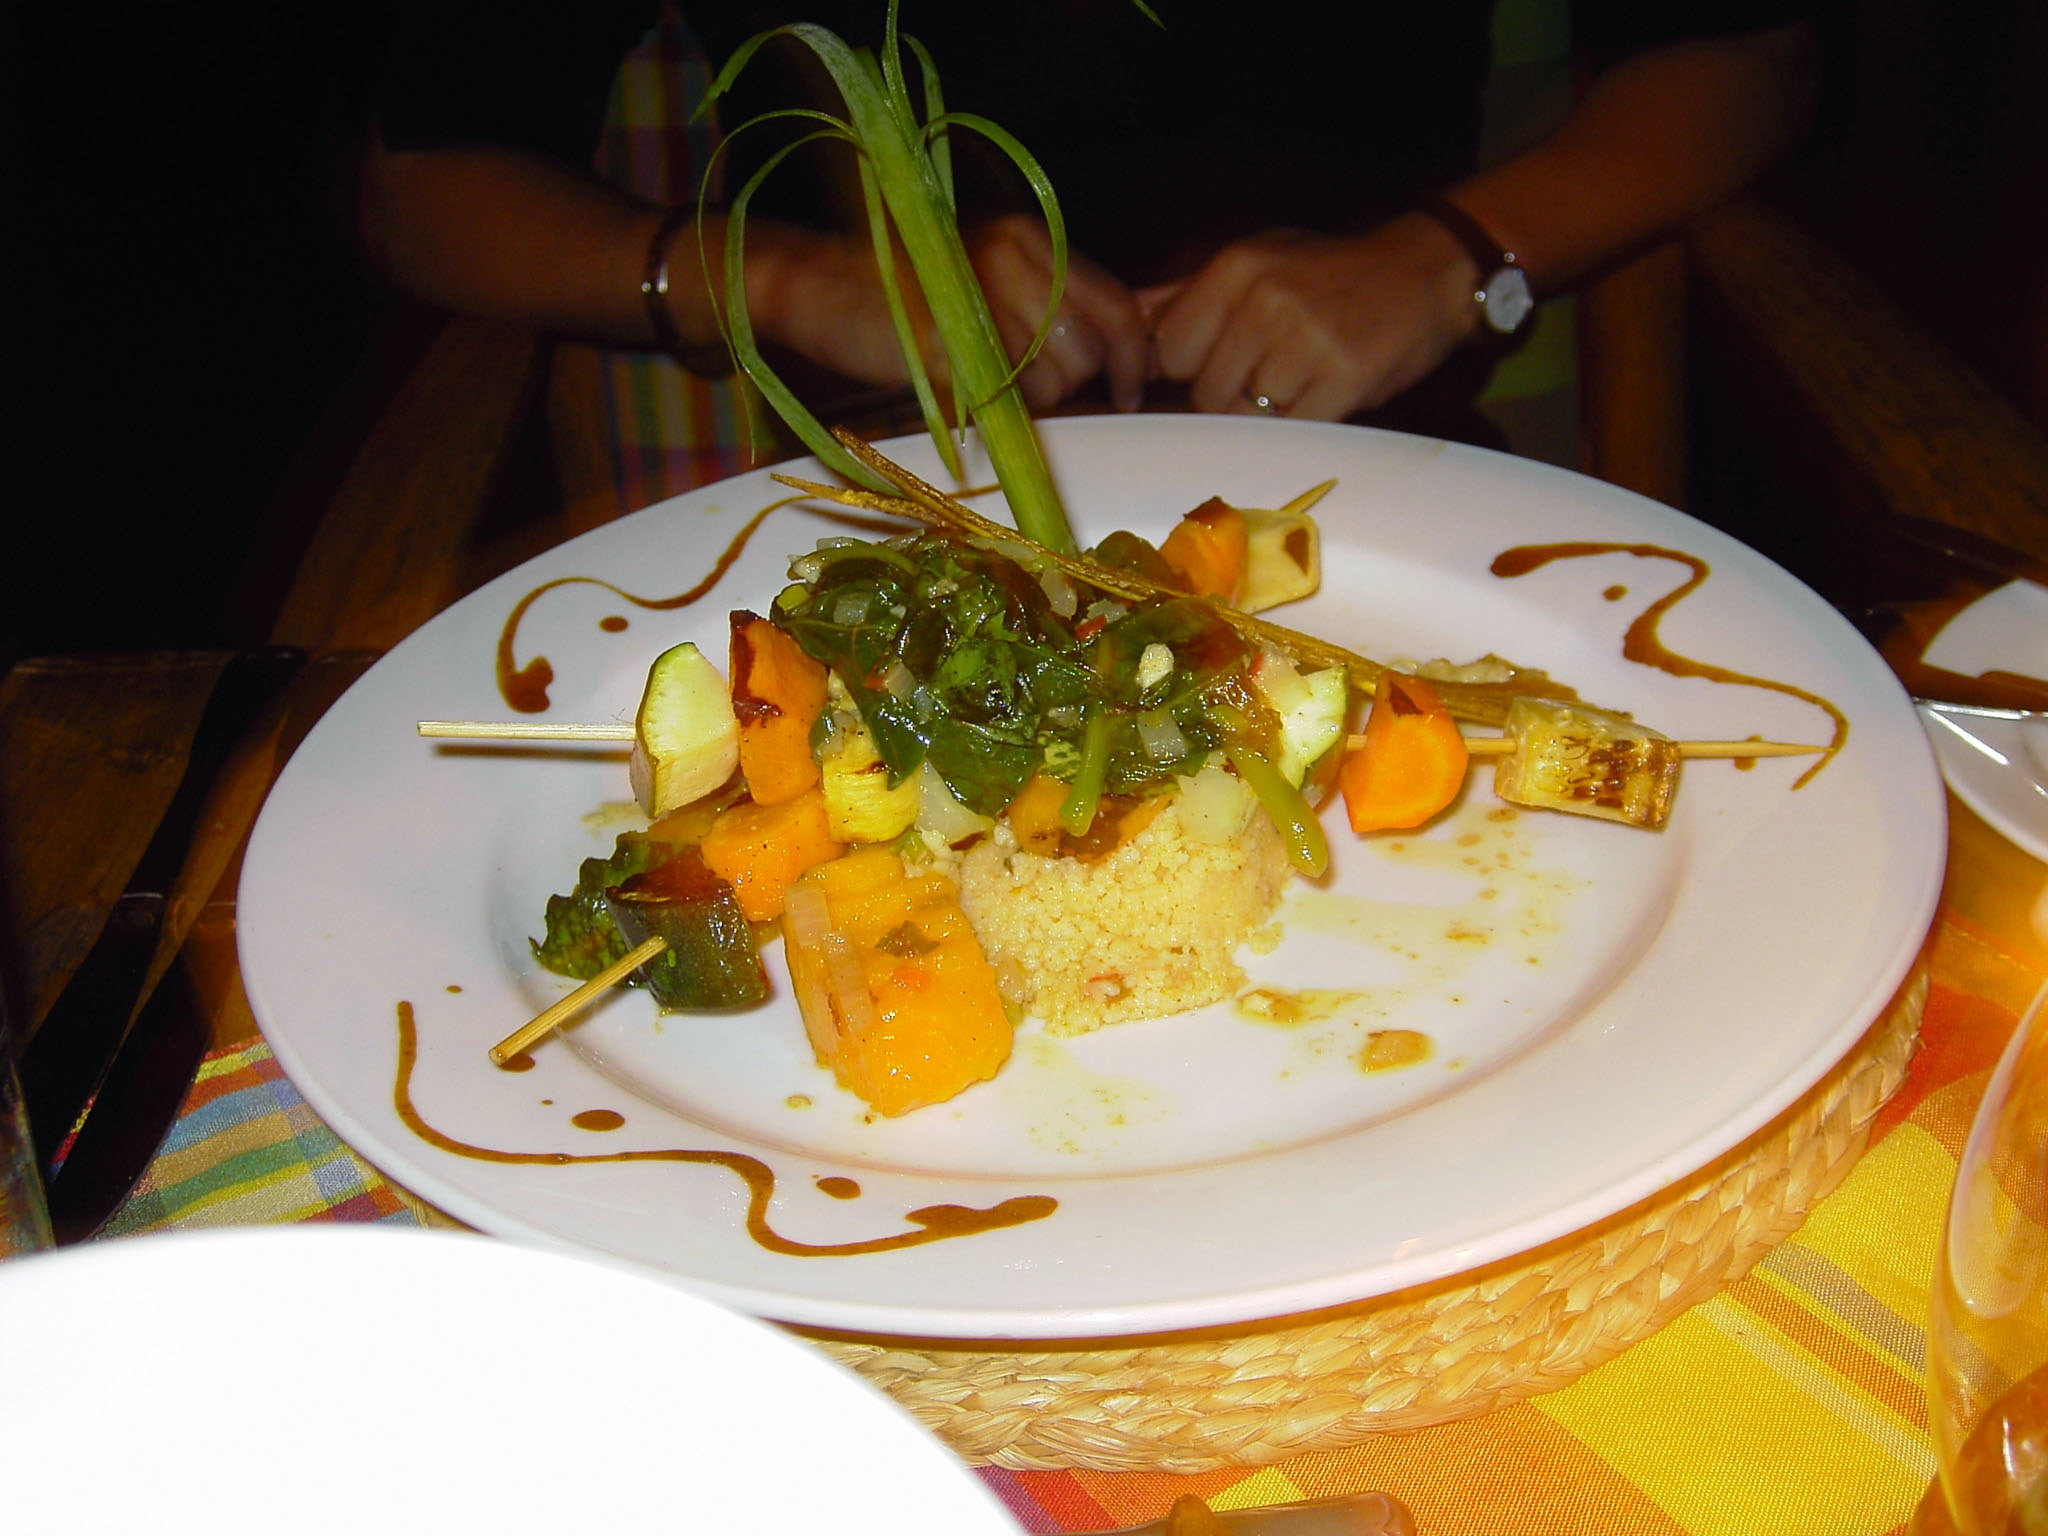 Fancy food plating at Dasheene in Ladera Resort, one of the best restaurants in St. Lucia, grilled vegetables and fruit skewers